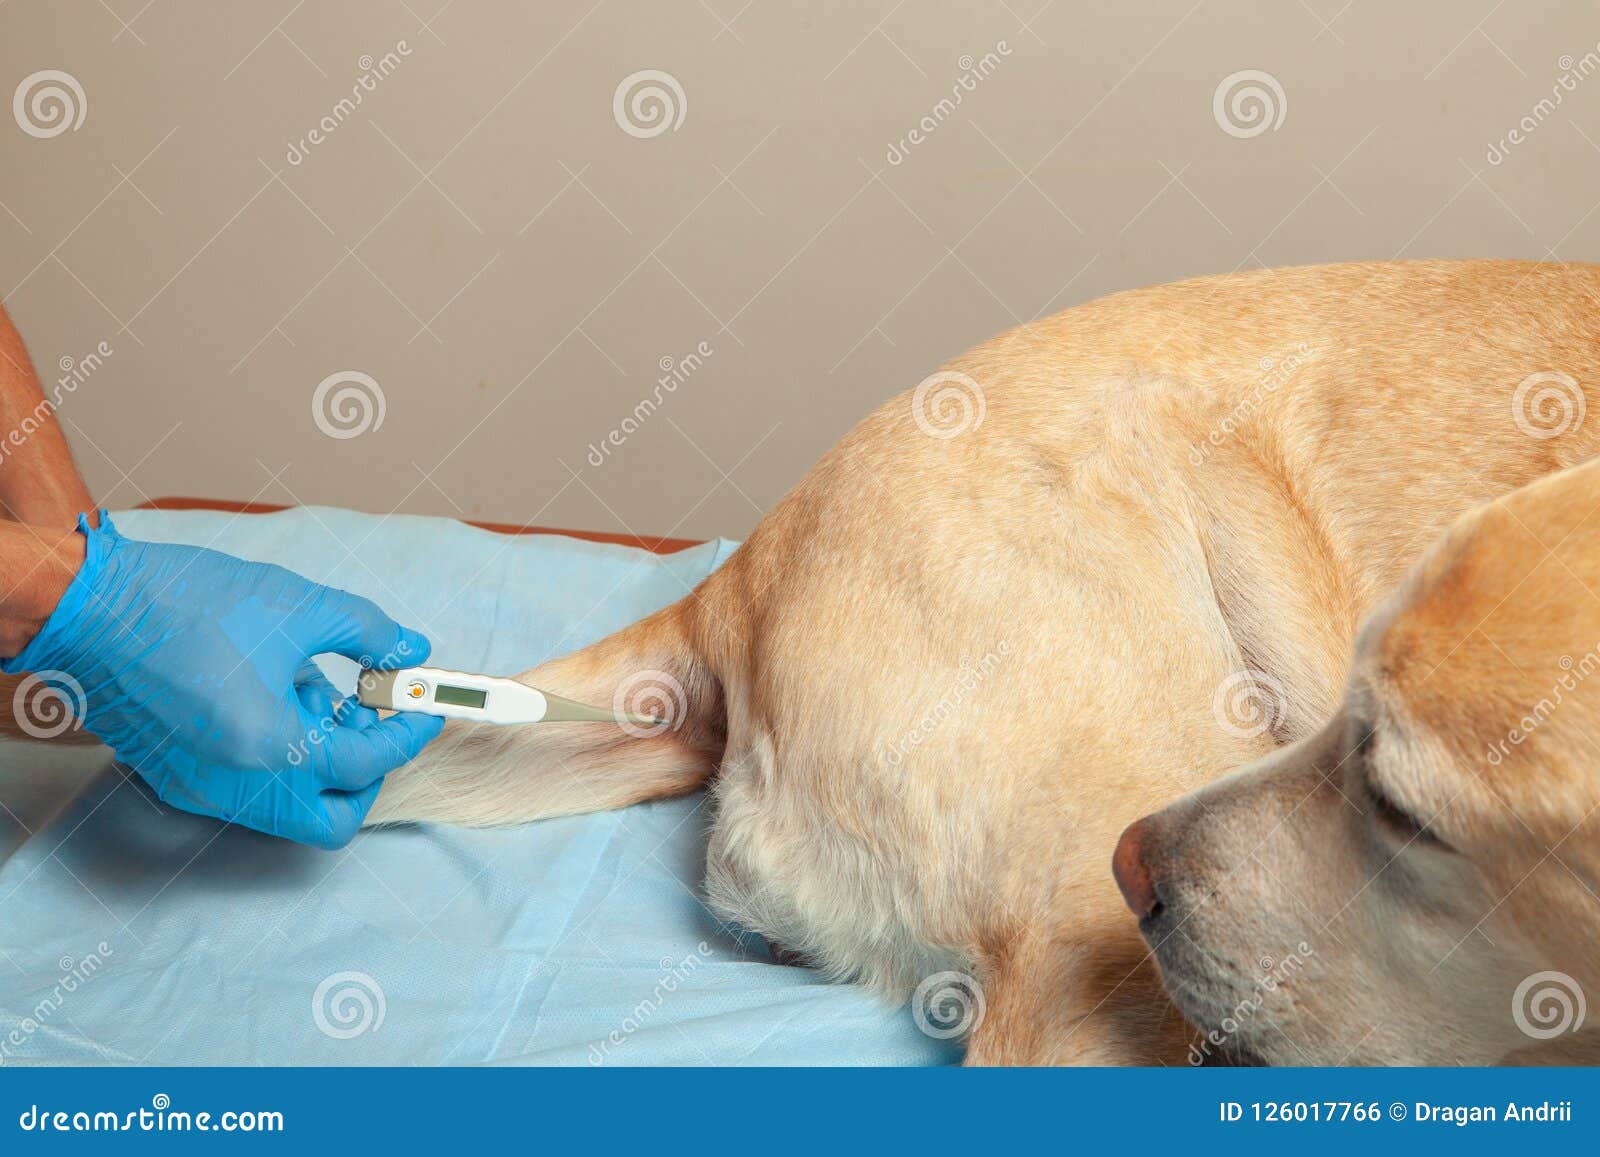 Measurement Of Temperature In The Dog By Rectal